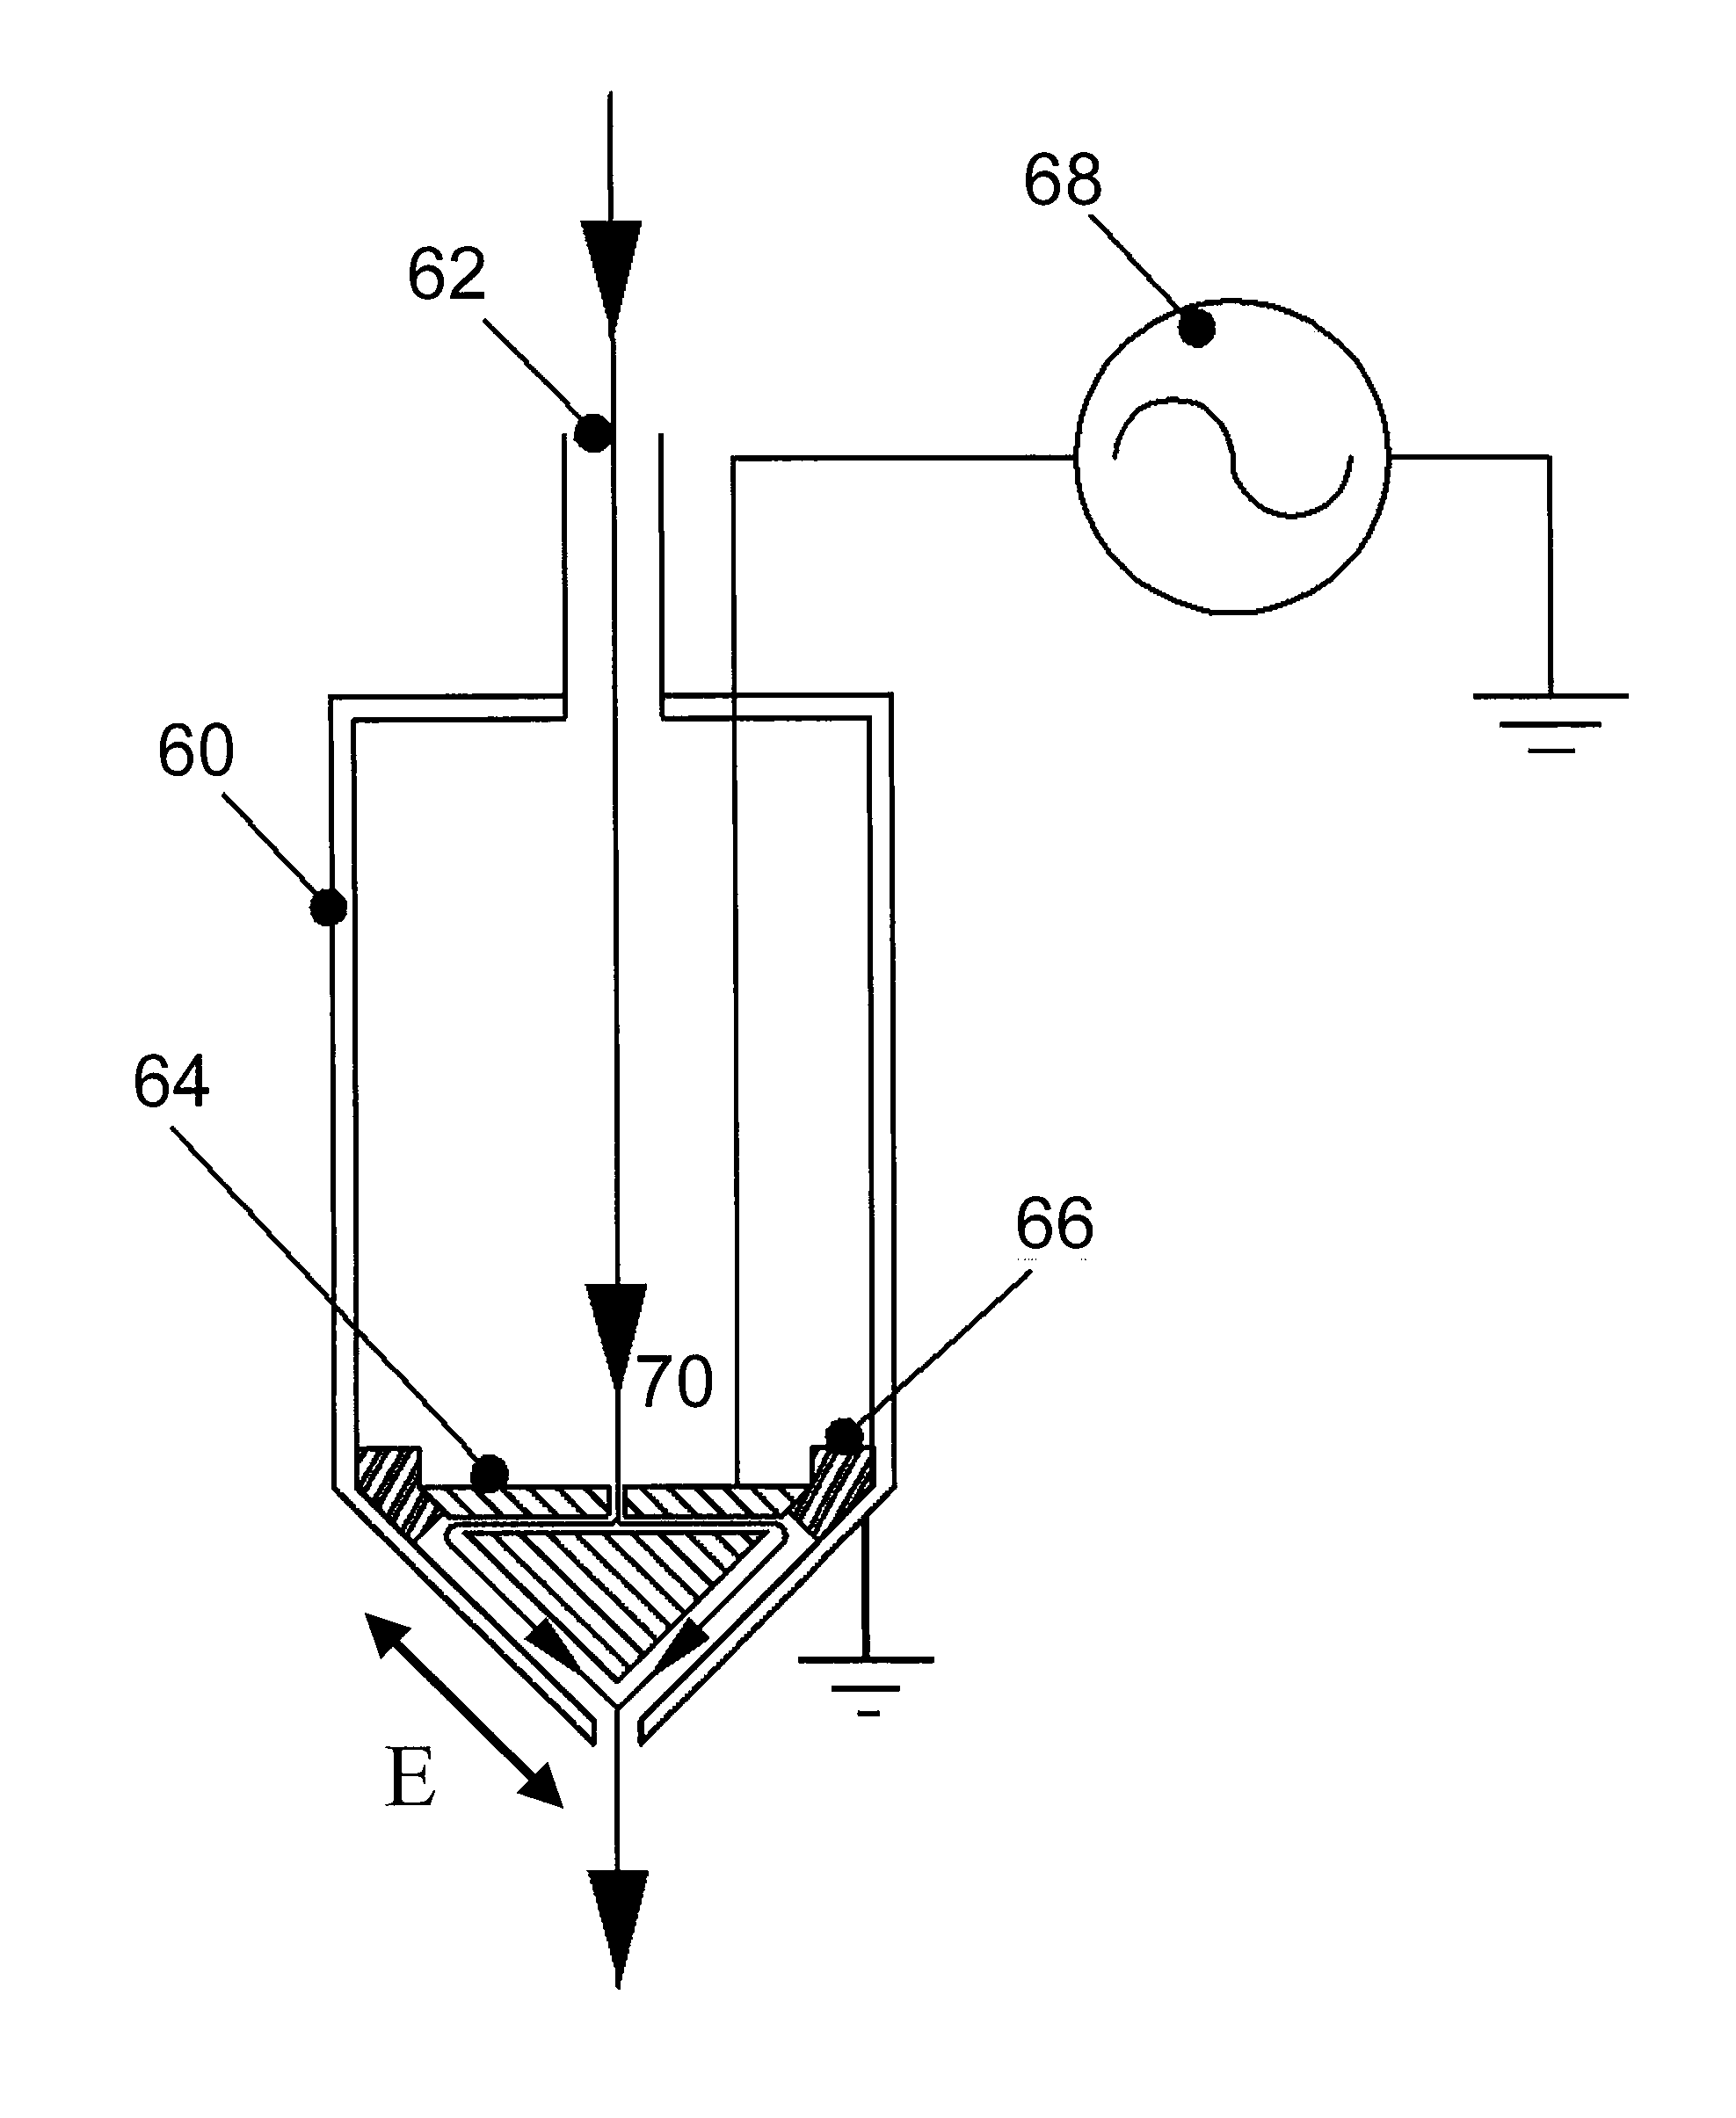 Low-temperature, converging, reactive gas source and method of use